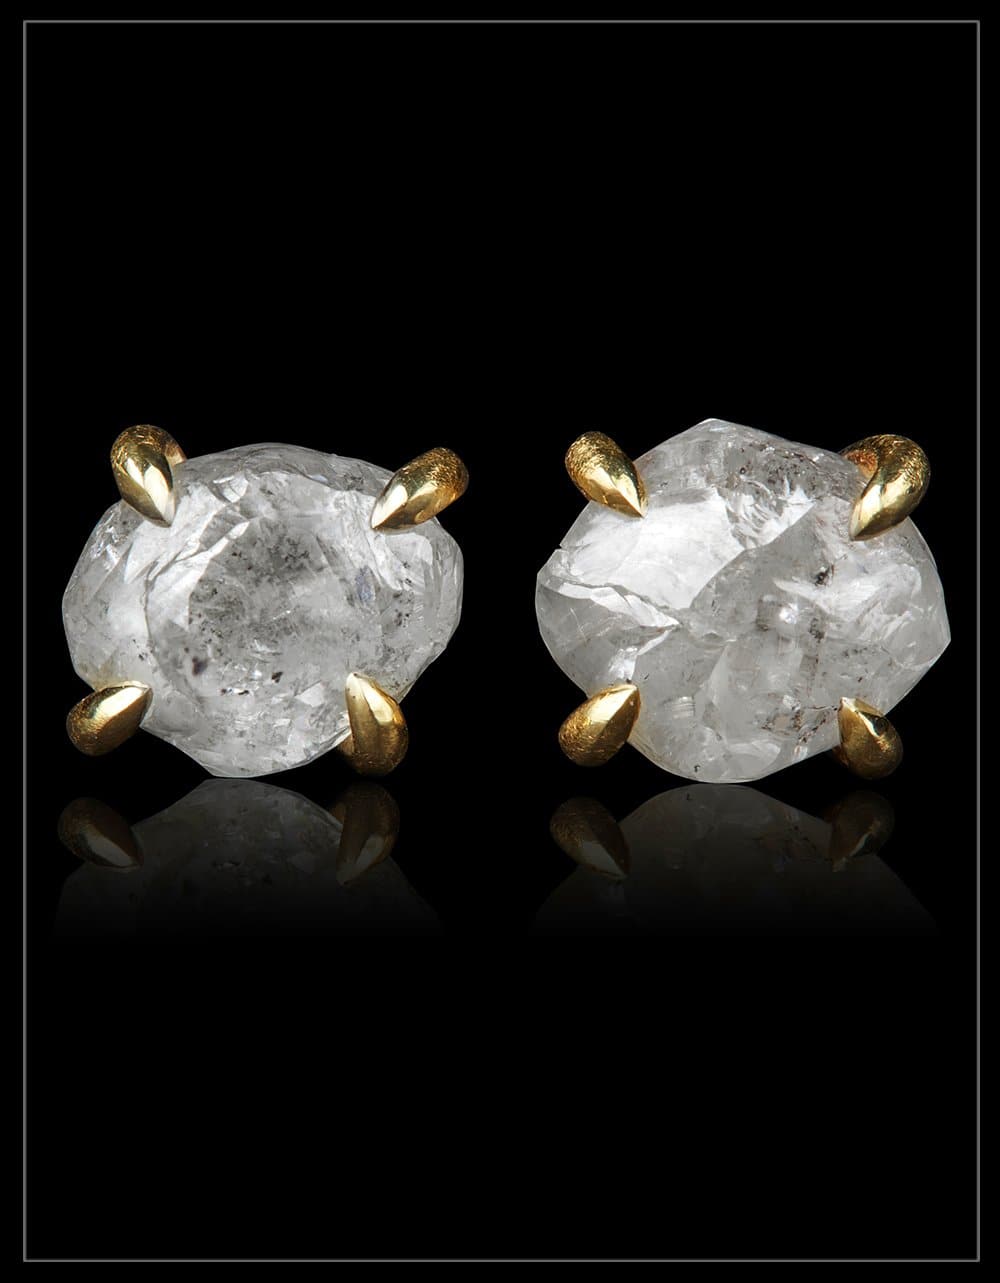 Gold Earrings With Storytellings From Eternity – 4.85 ct.